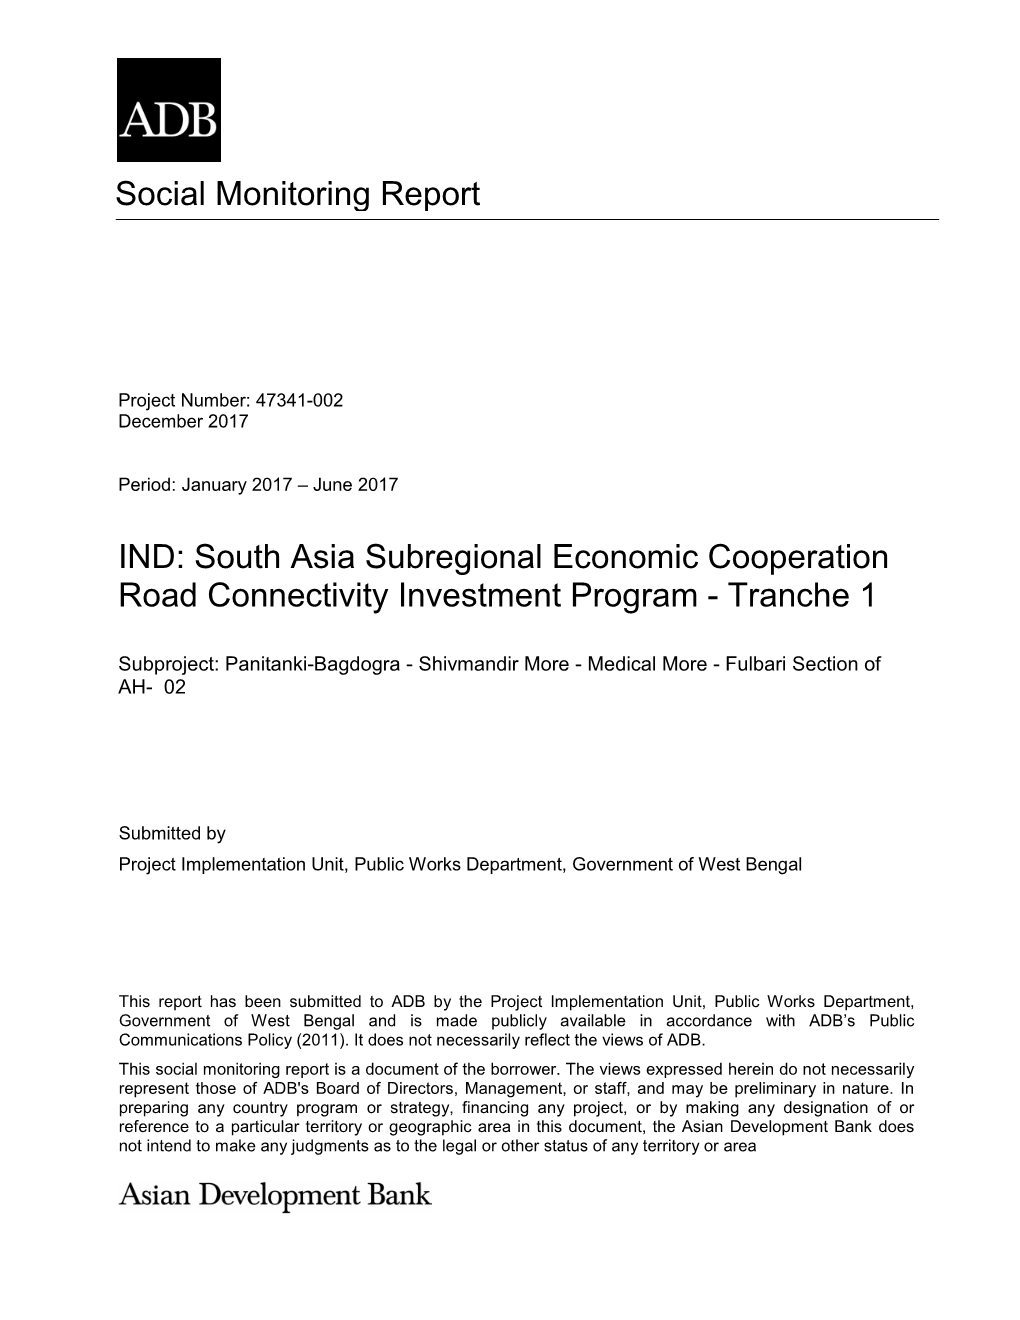 South Asia Subregional Economic Cooperation Road Connectivity Investment Program - Tranche 1